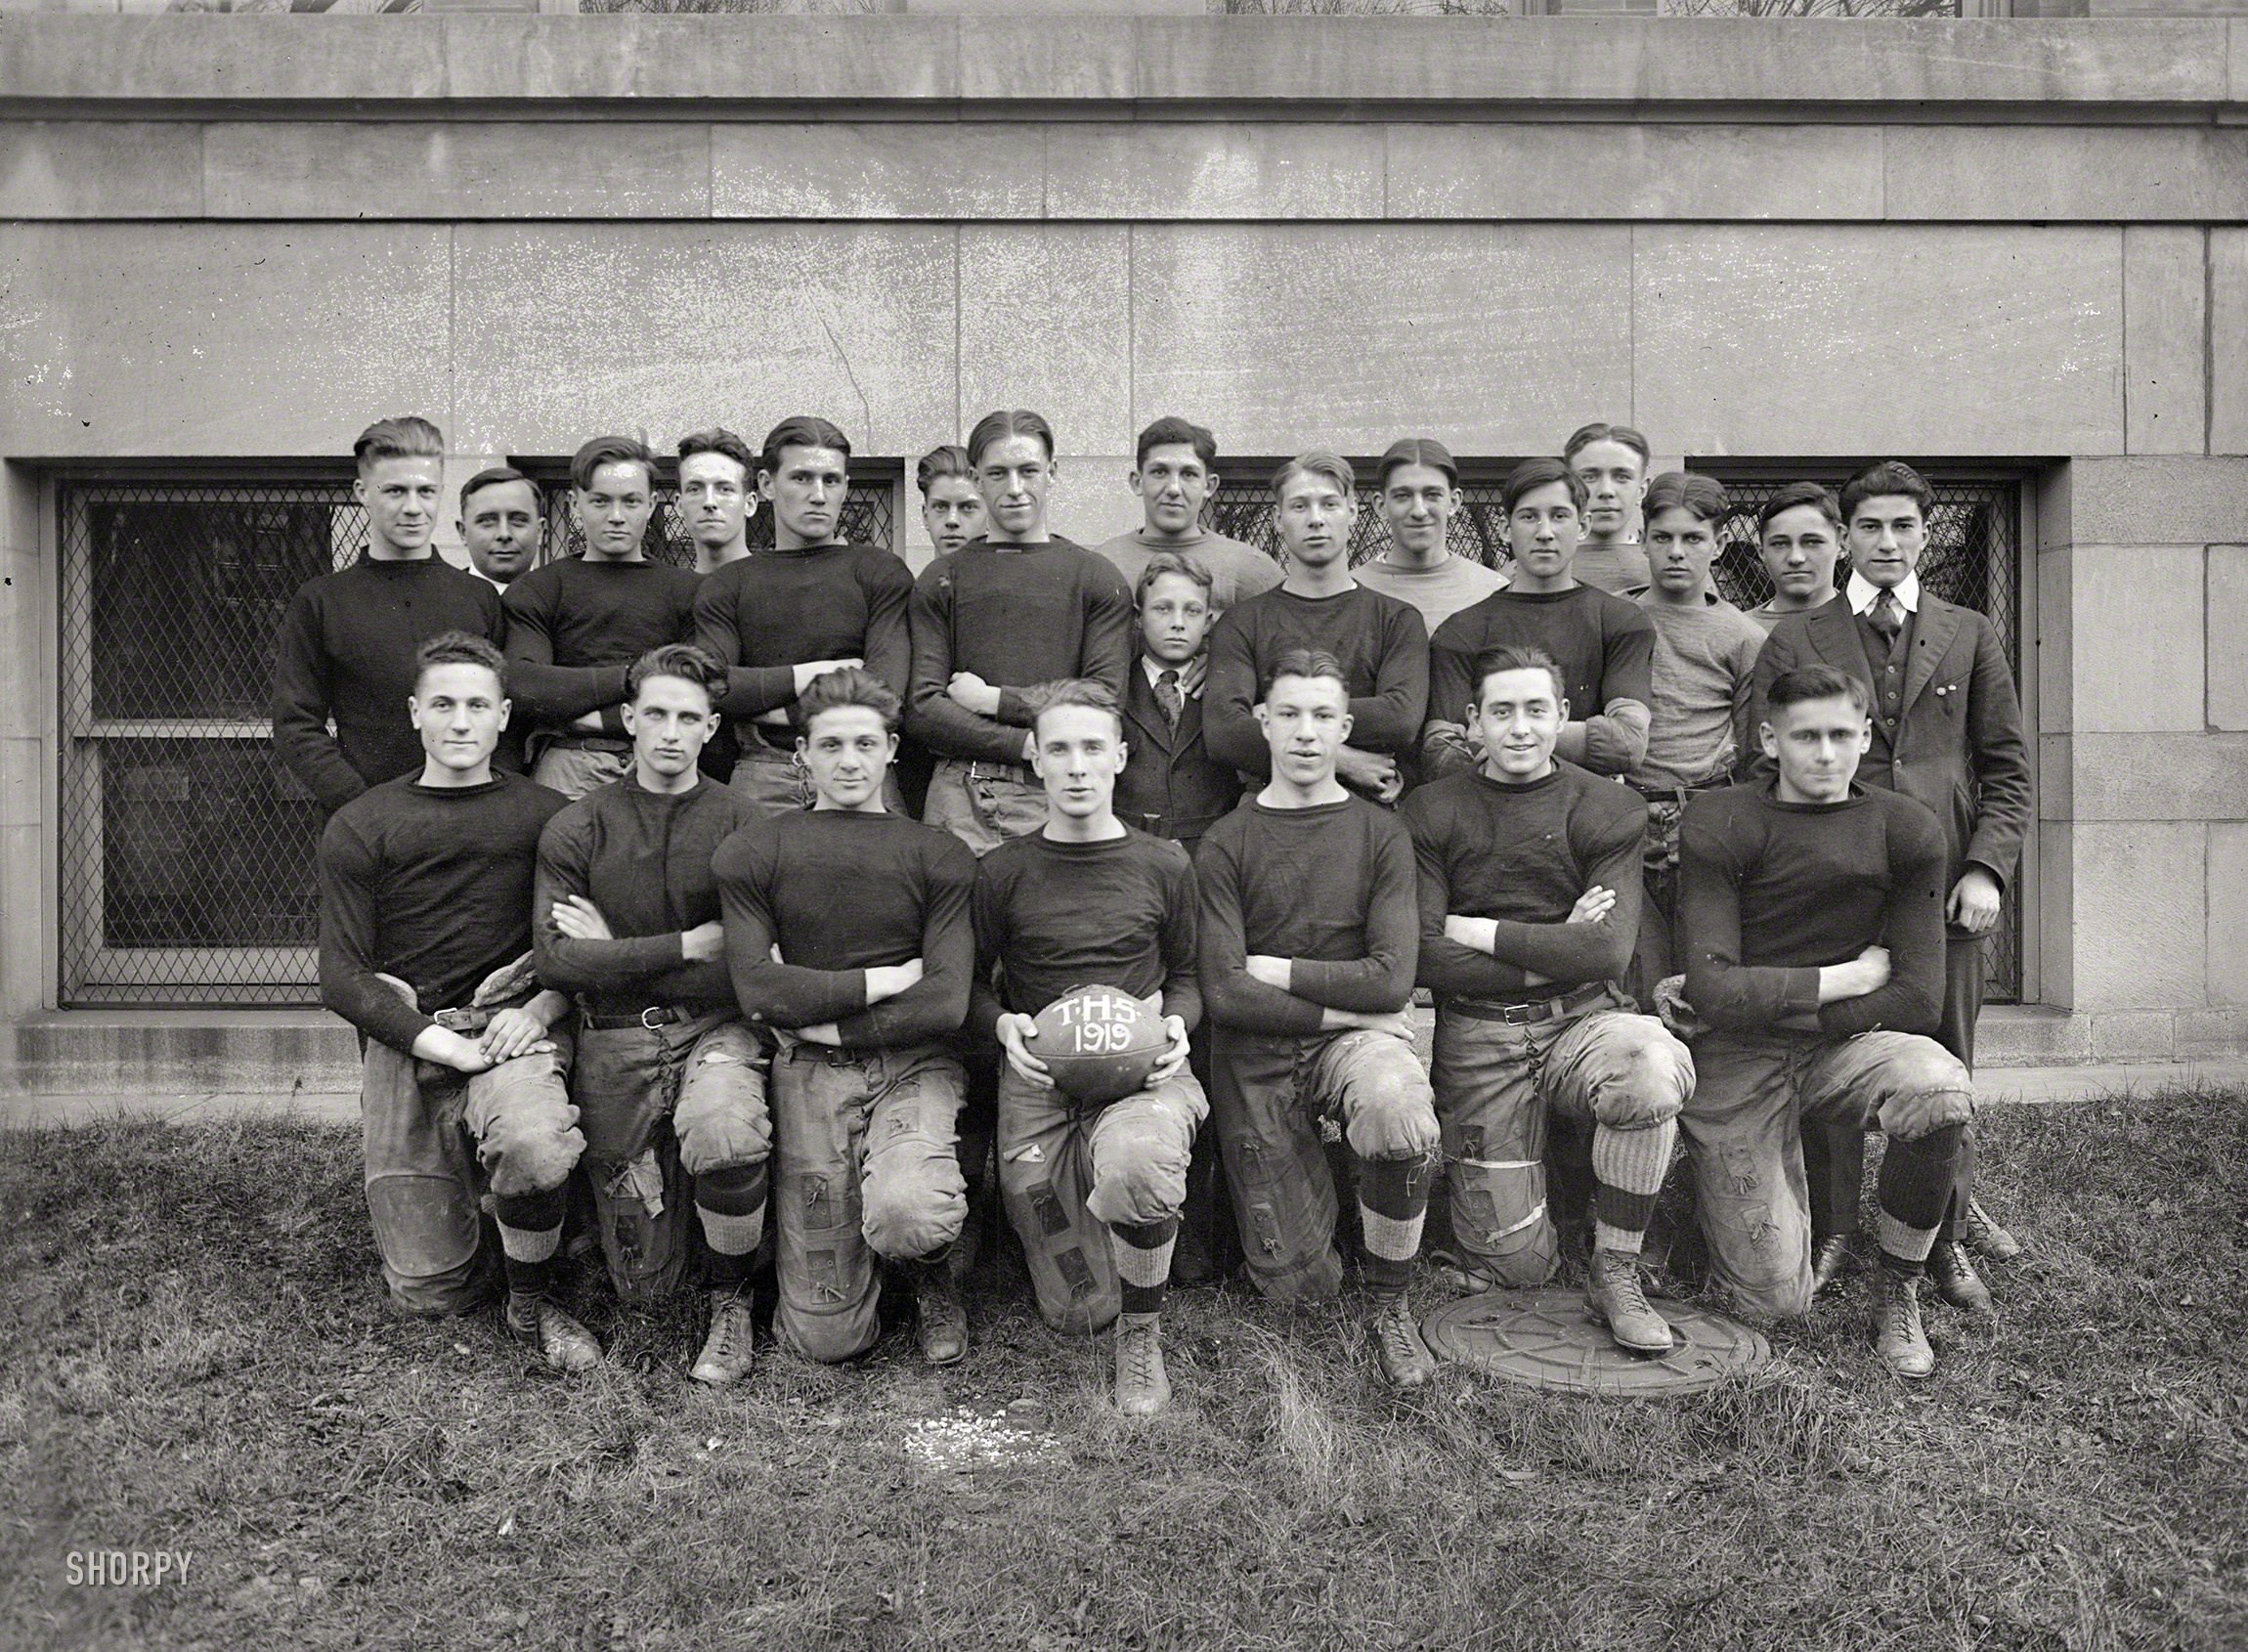 Washington, D.C. "Tech High football, 1919." As soon as we're done with our homework, look out. 8x10 glass negative, National Photo Co. View full size.